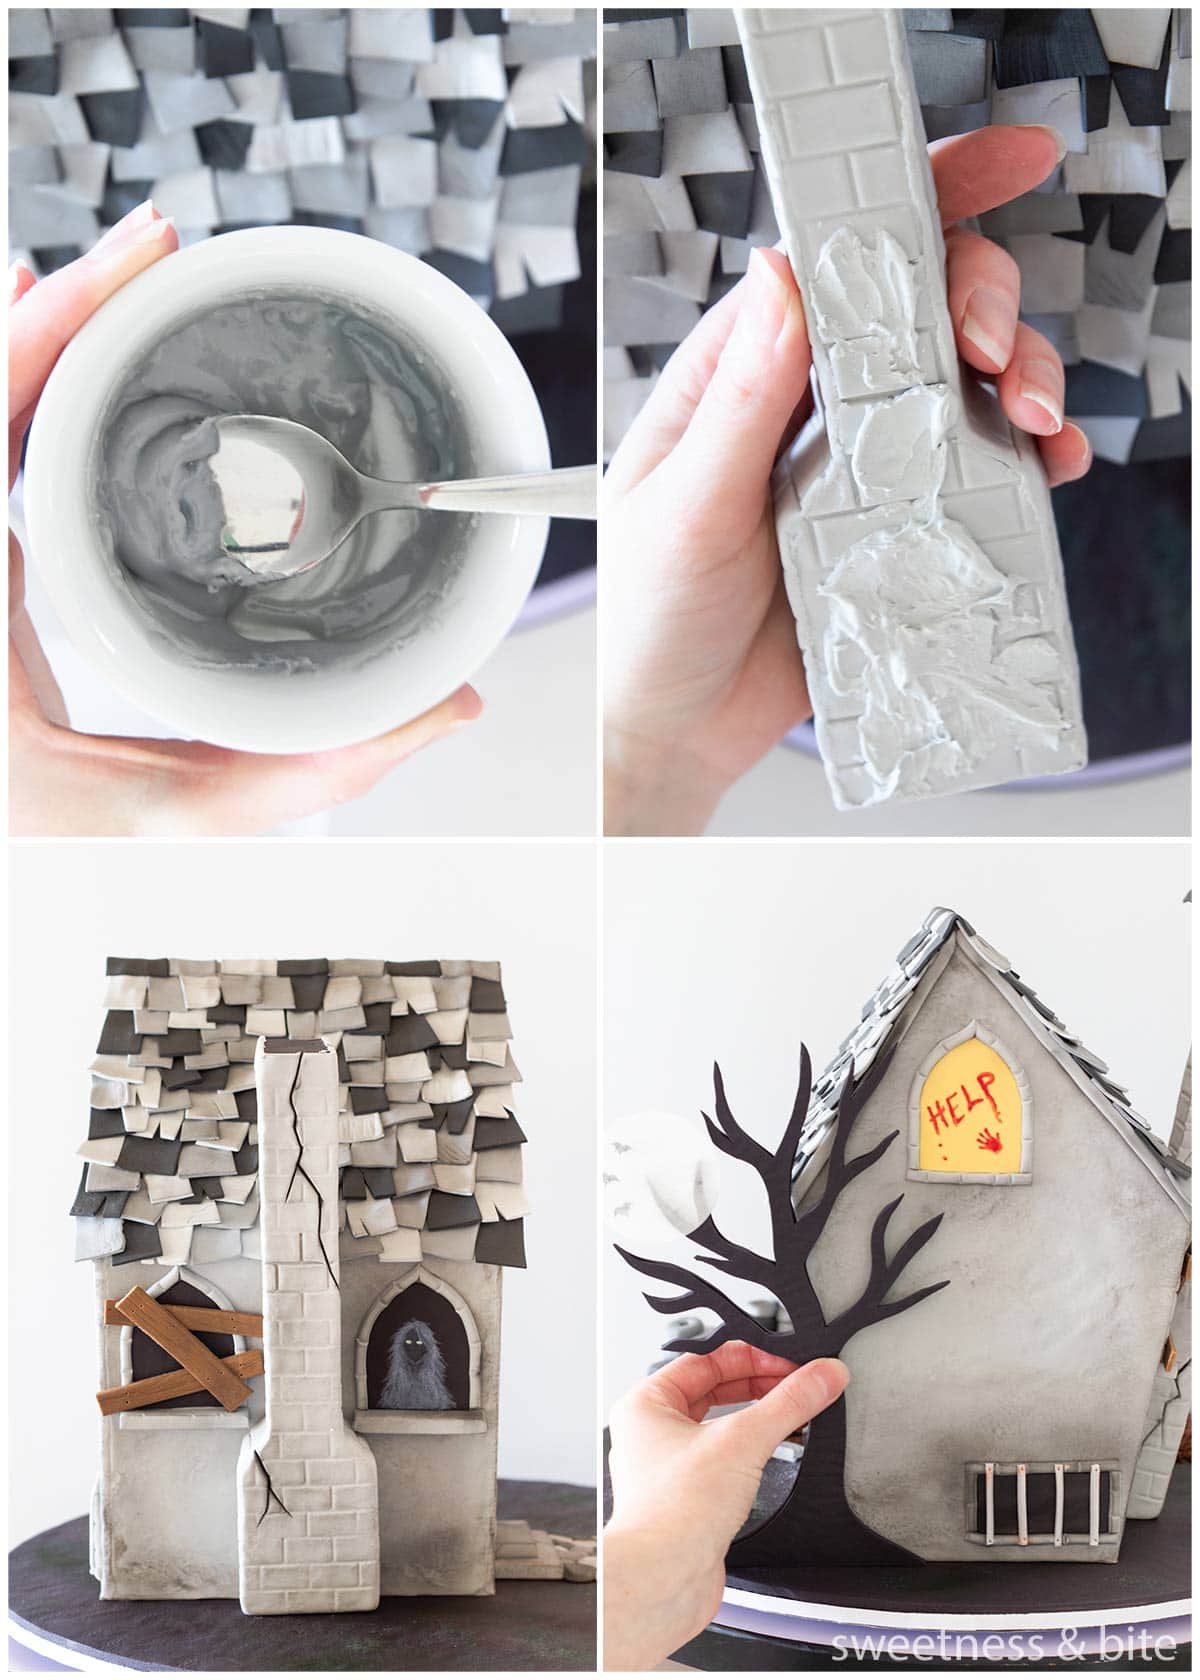 A collage of images of a haunted house cake, showing how to use melted fondant to attach the chimney and a 2D tree silhouette to sides of the cake.